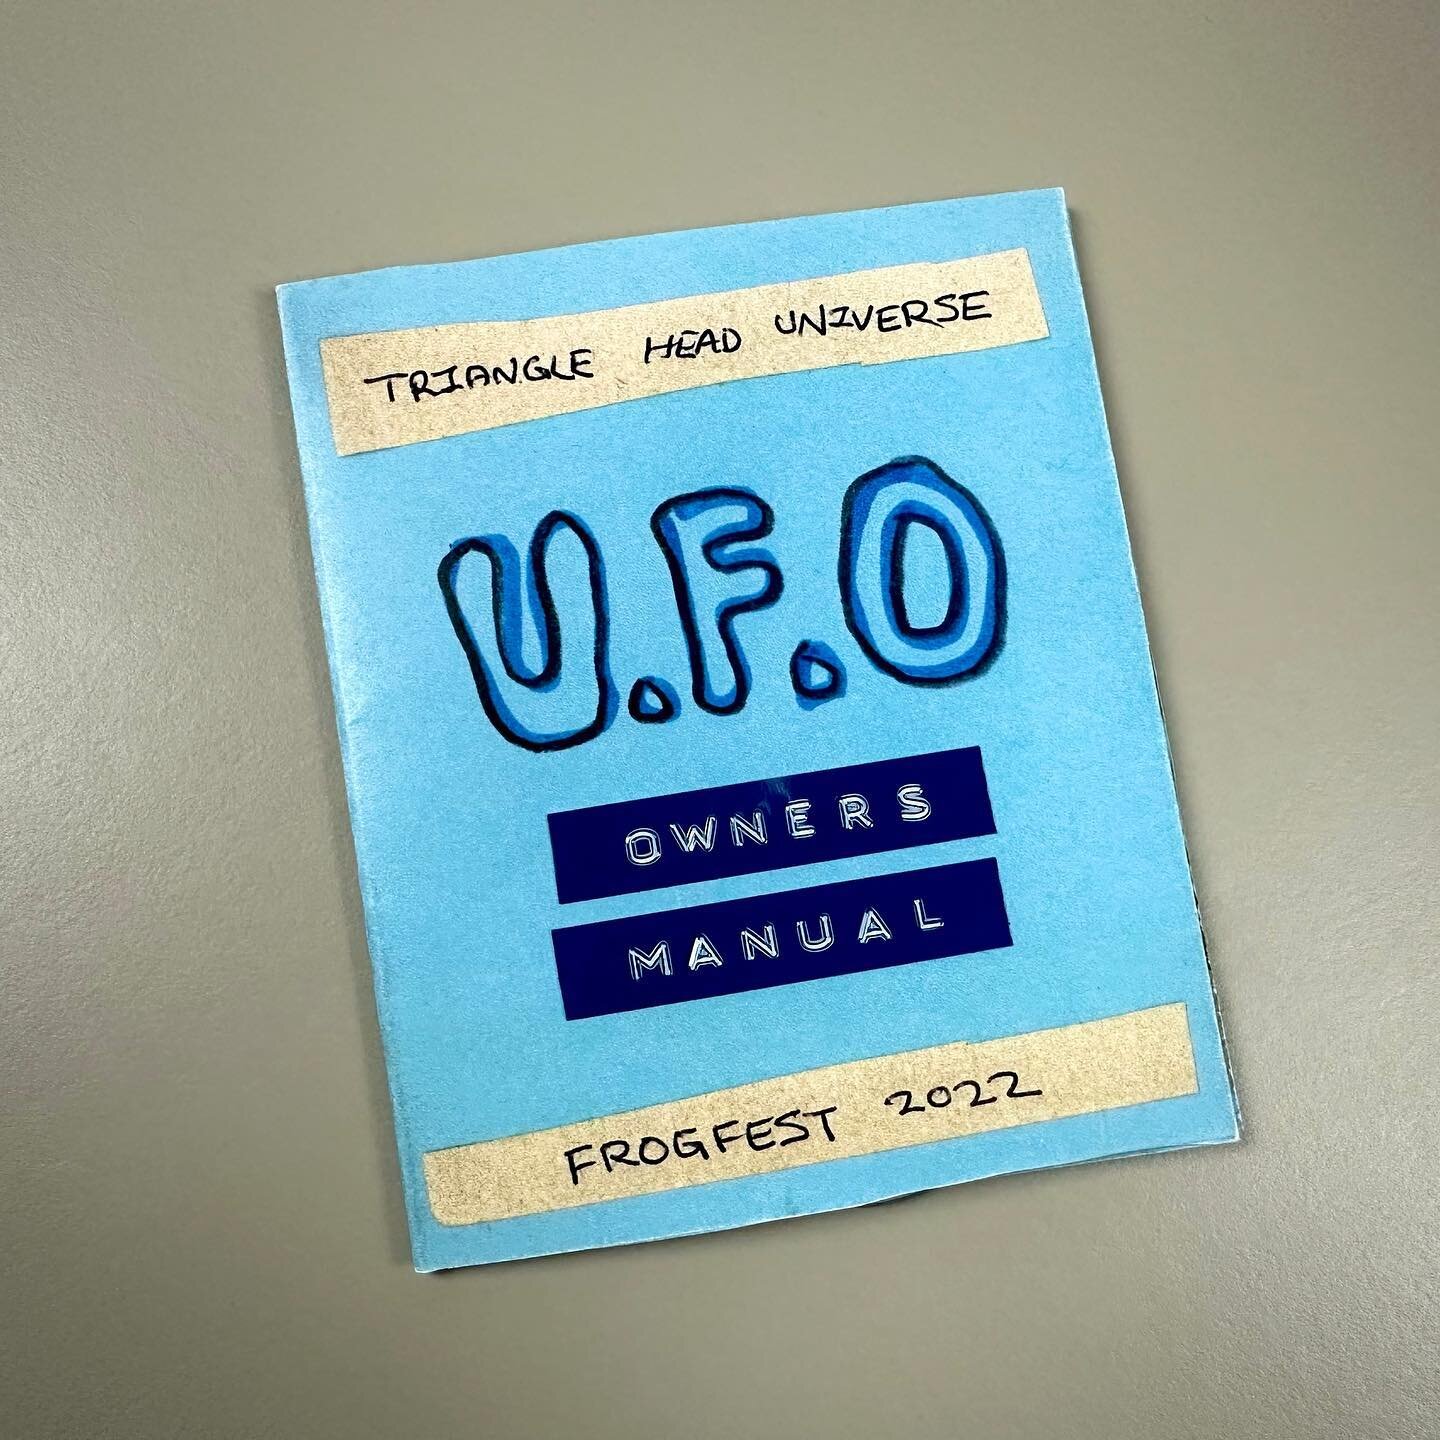 Through space, time, and alternate dimensions we are excited to announce that our official UFO OWNER&rsquo;S MANUAL is now available in our online shop! Inside you&rsquo;ll discover a multimedia collage of everything you need to know about taking car